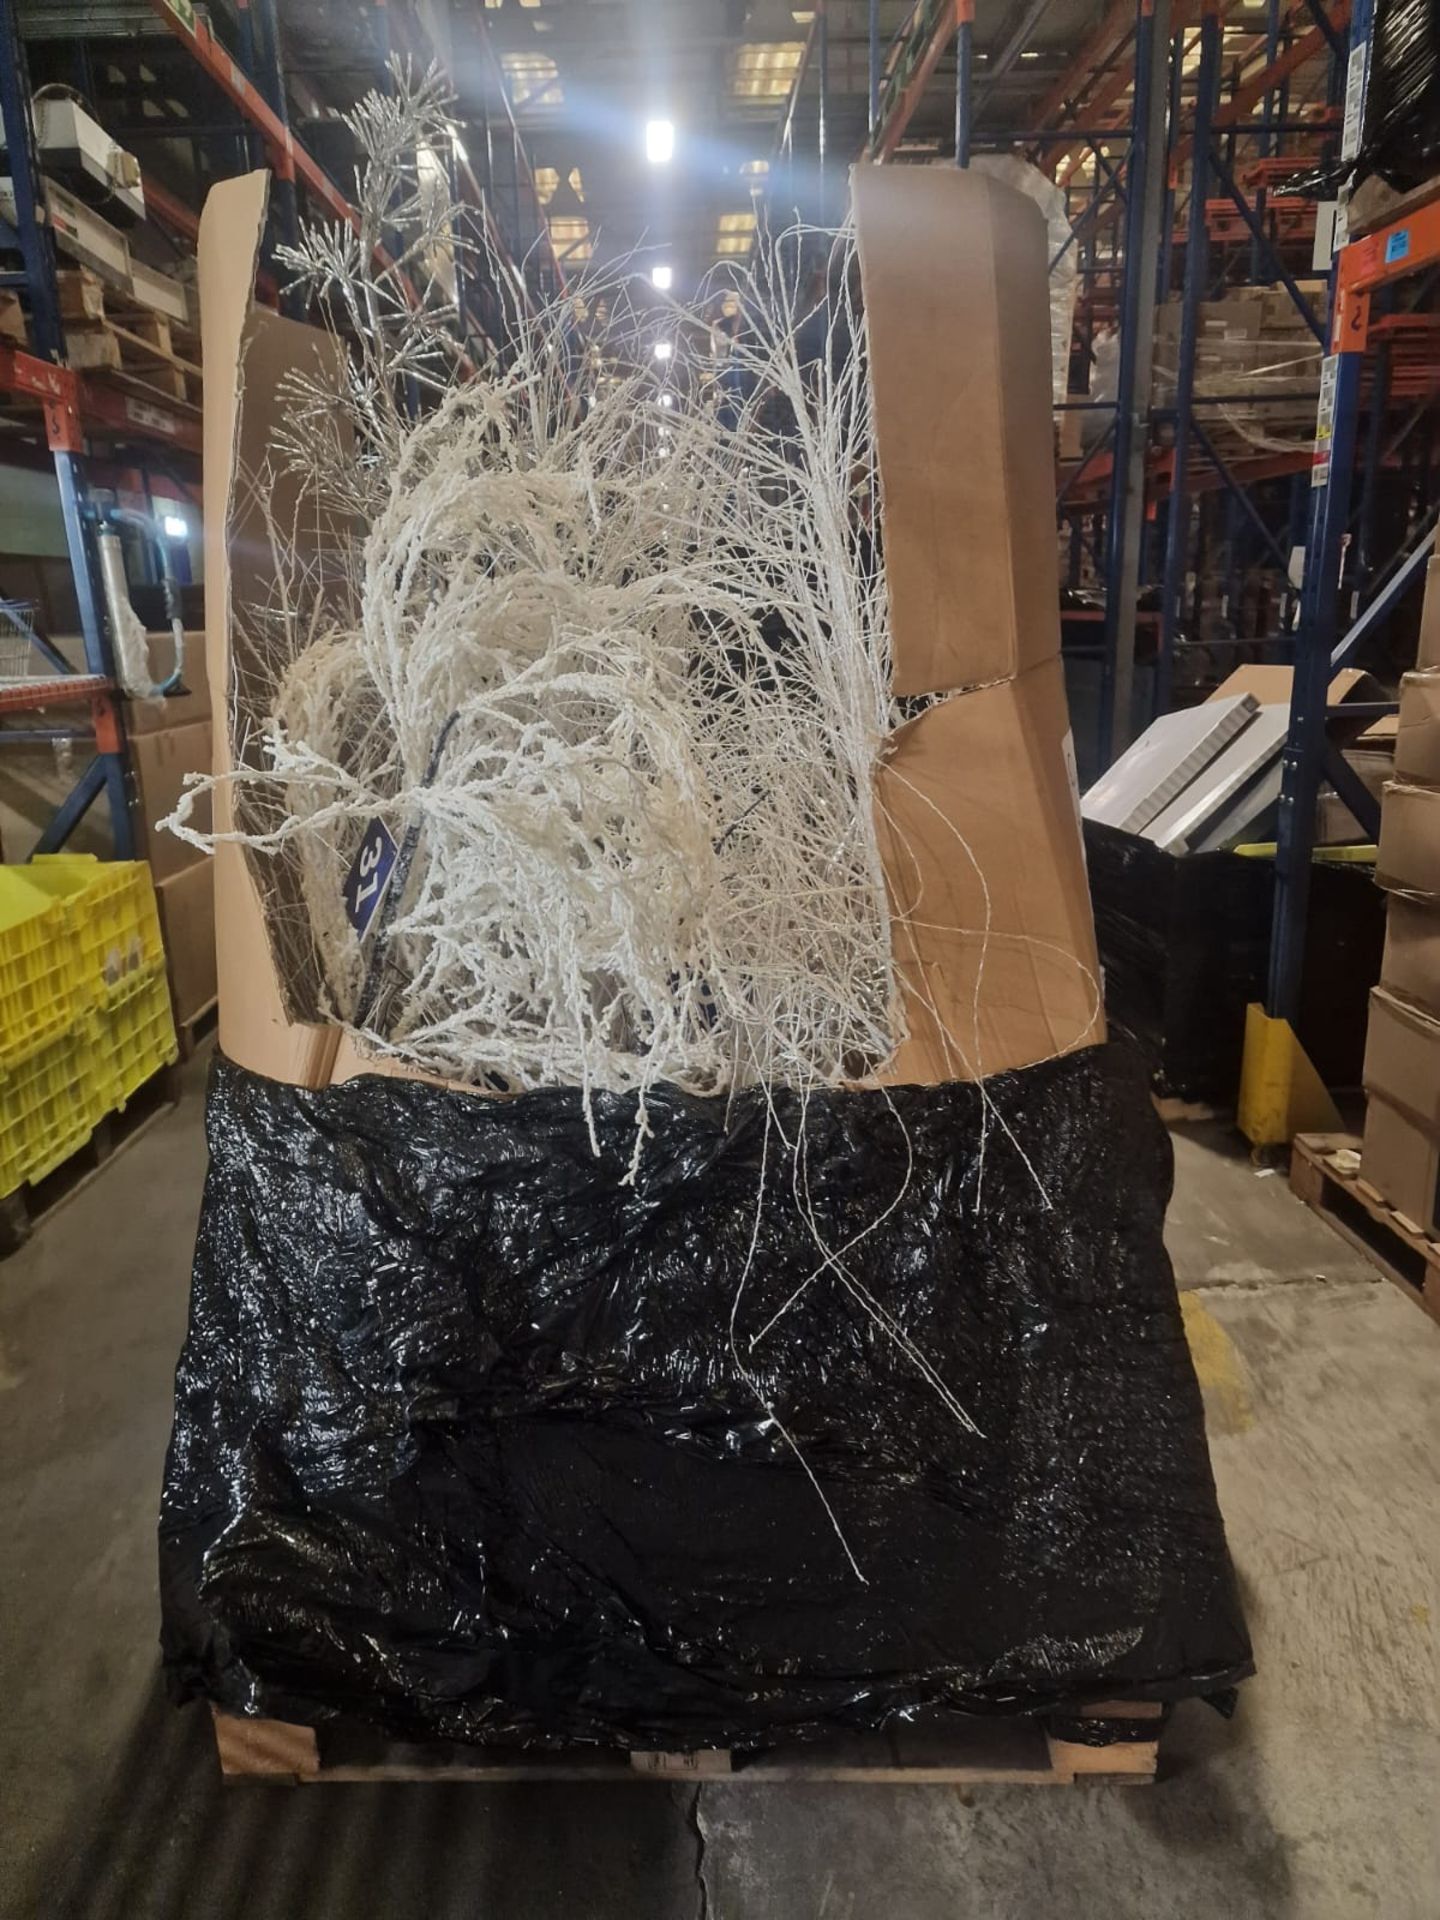 1 PALLET OF CLEARANCE LED LIGHTS,LED TREES, DEOCRATIONS & MORE!